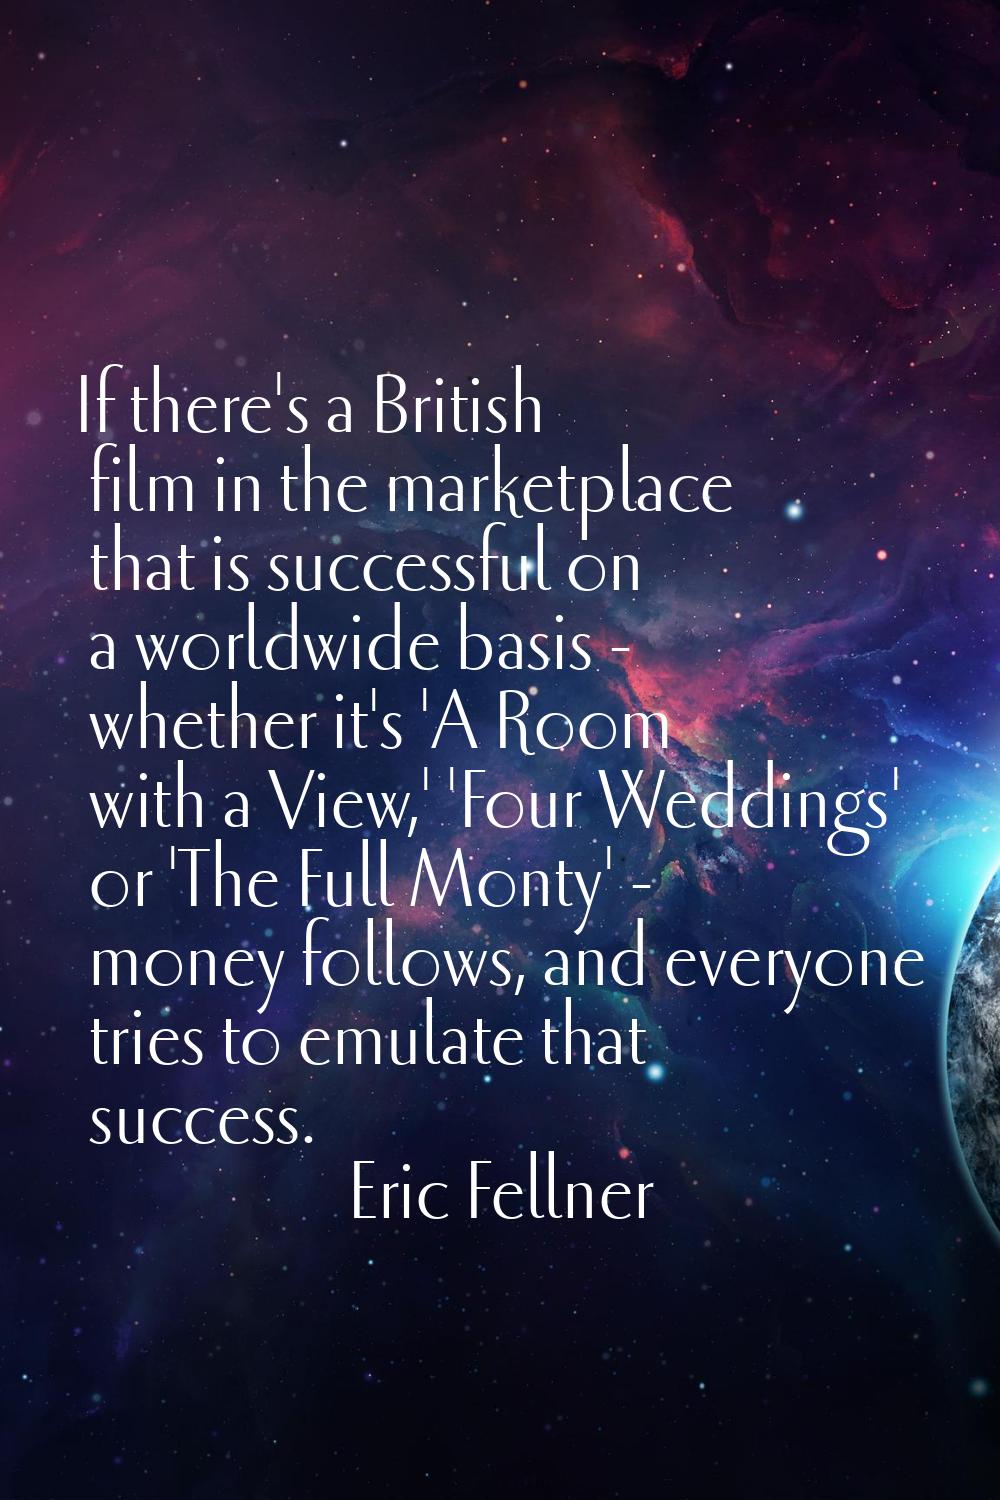 If there's a British film in the marketplace that is successful on a worldwide basis - whether it's